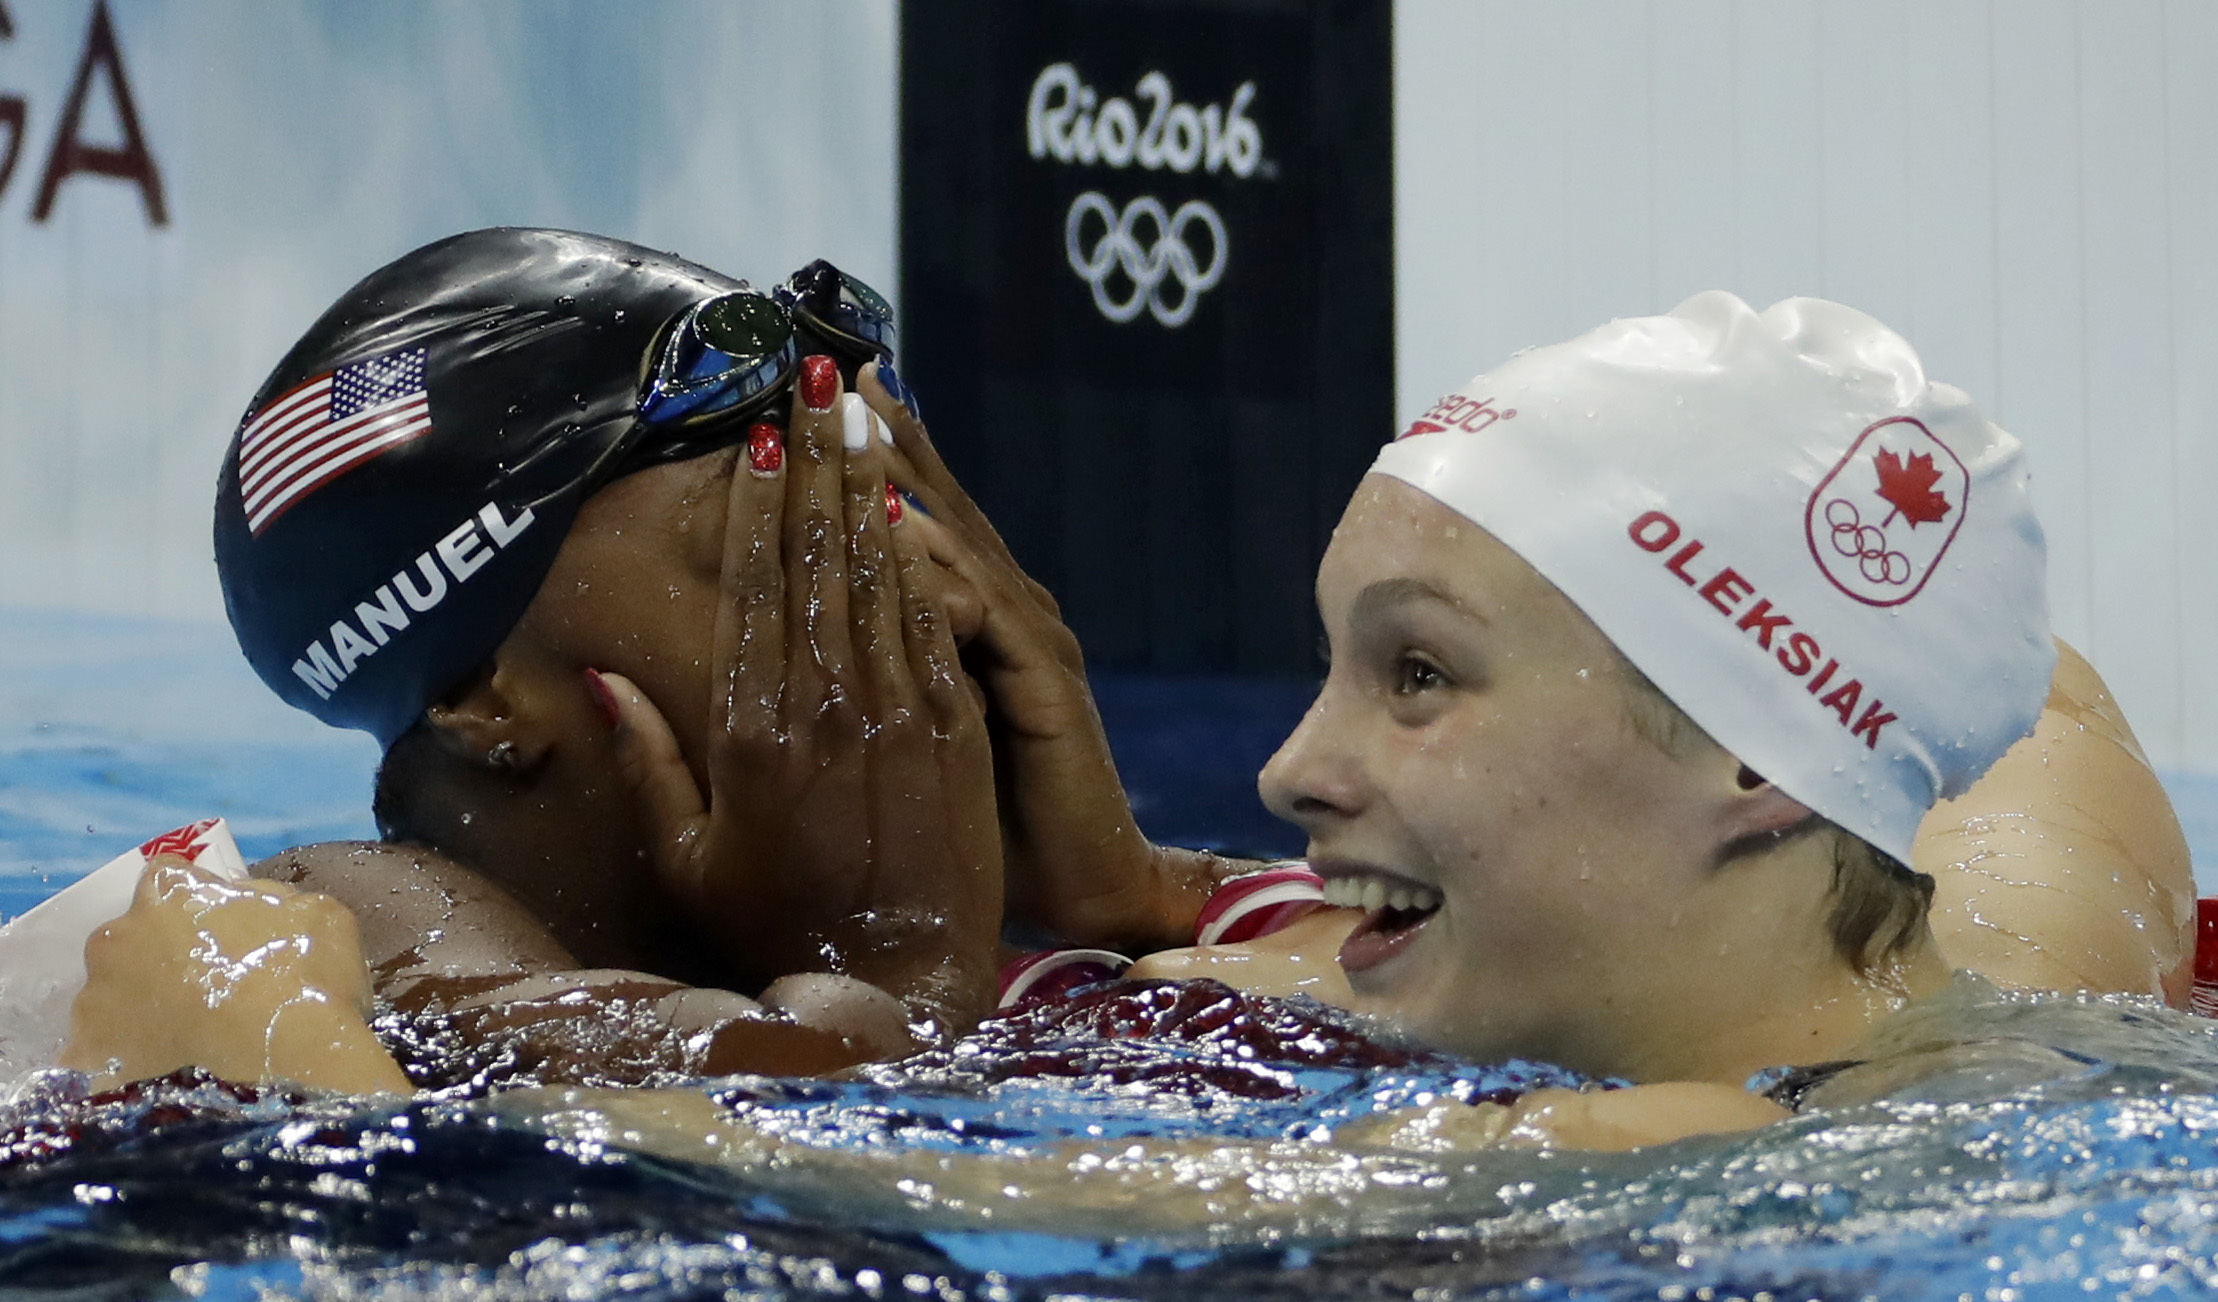 United States' Simone Manuel, left, and Canada's Penny Oleksiak celebrate winning joint gold and setting a new Olympic record in the women's 100-meter freestyle during the swimming competitions at the 2016 Summer Olympics, Thursday, Aug. 11, 2016, in Rio de Janeiro, Brazil.